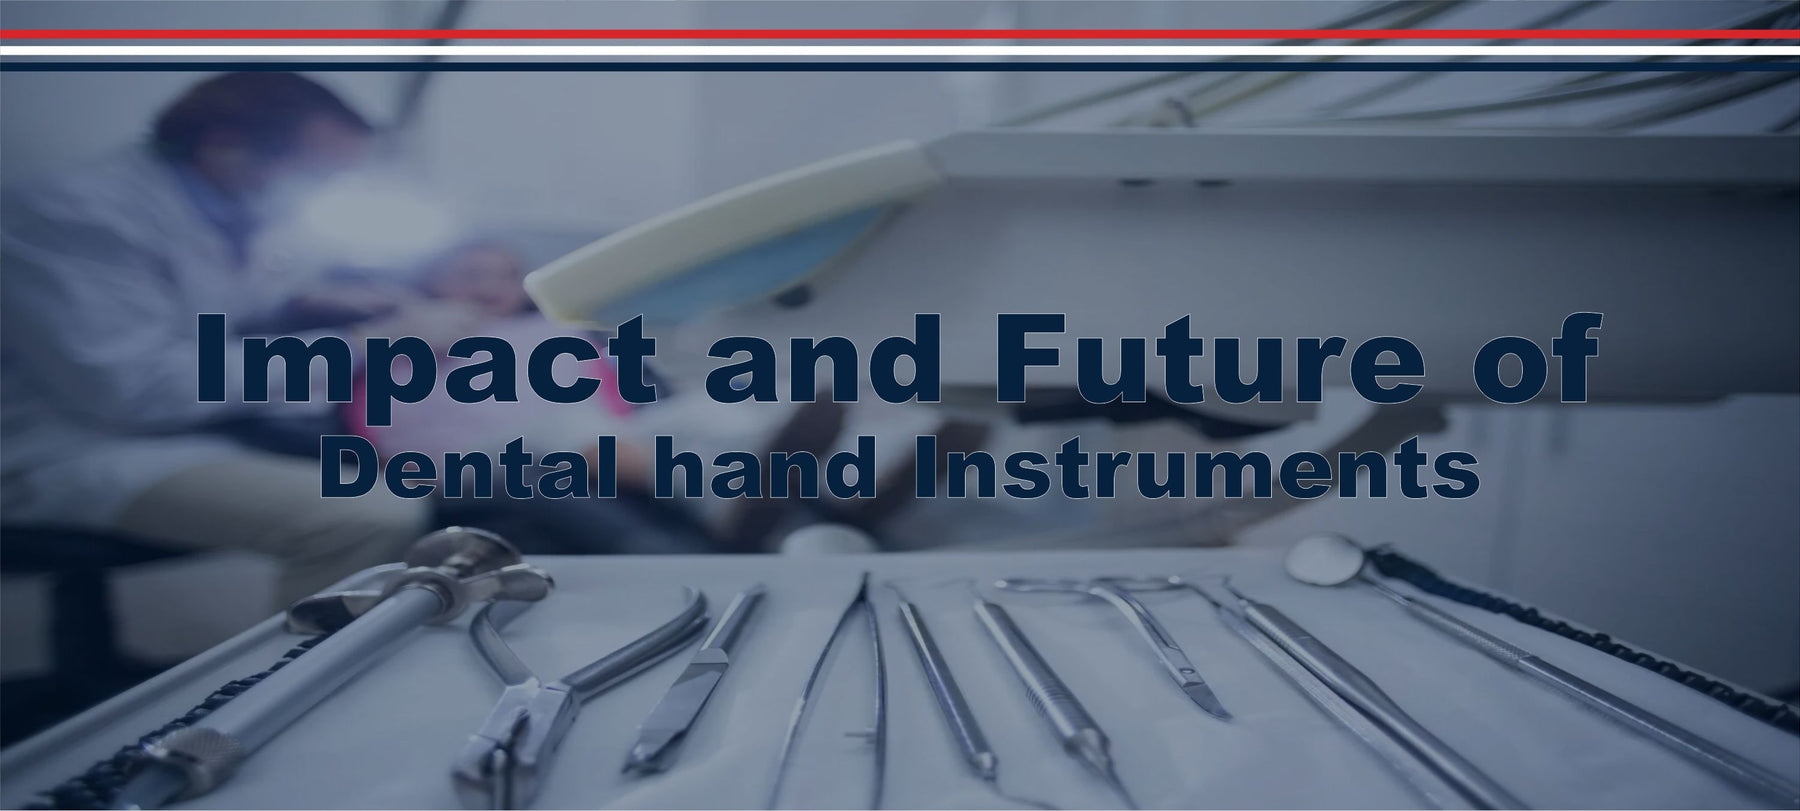 Impact and Future of Dental hand Instruments